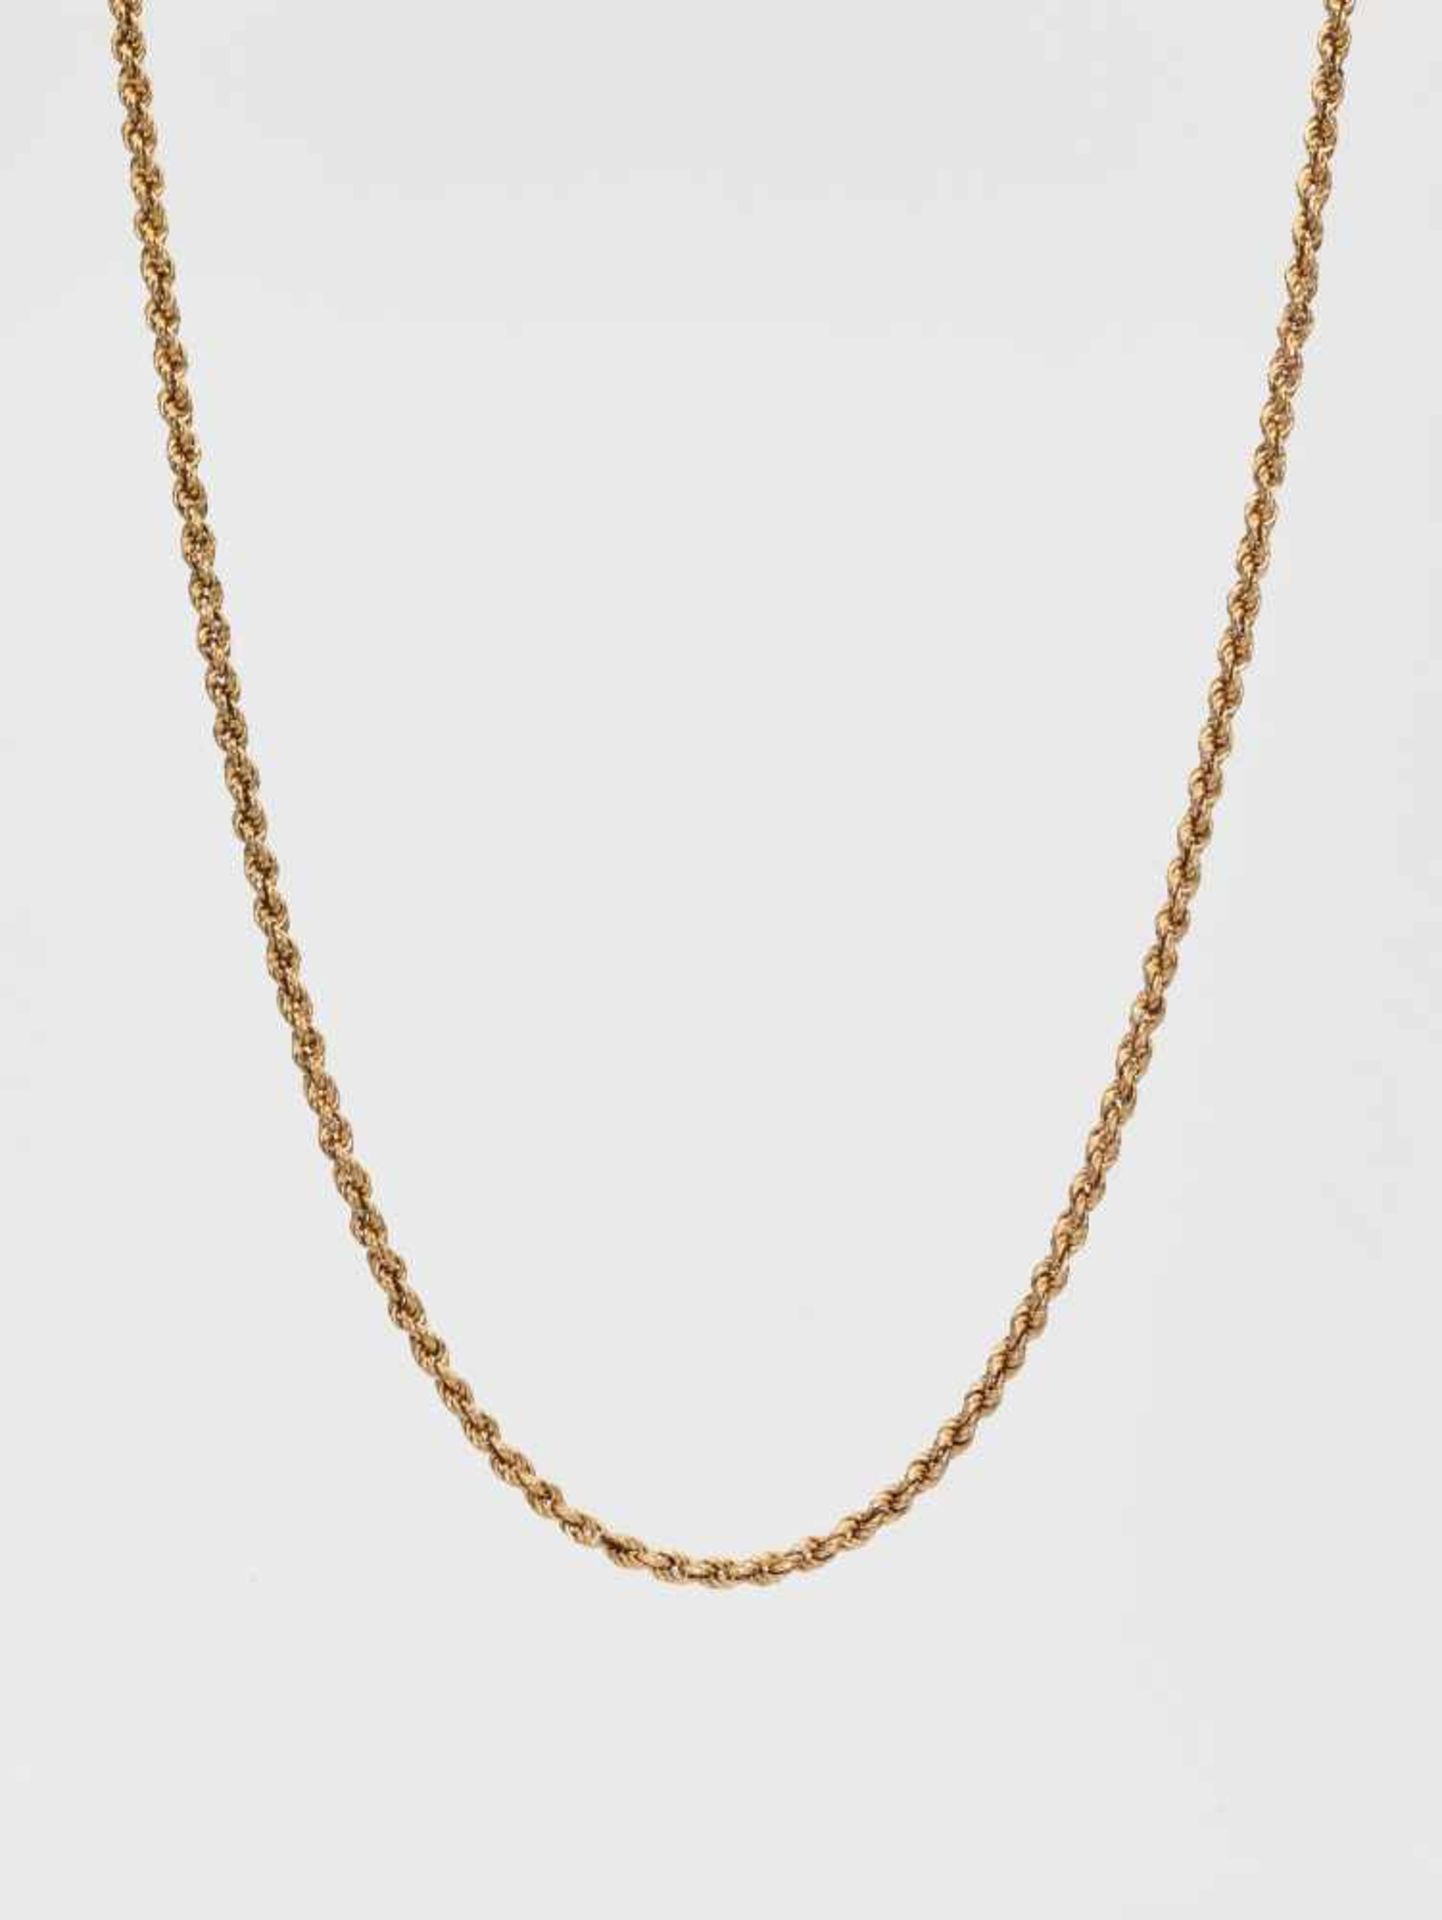 A 14 CARAT ROSE GOLD PRINCE OF WALES CHAIN NECKLACEAustria1930s-1950s, hallmarked ‘14K’ as well as - Image 8 of 9